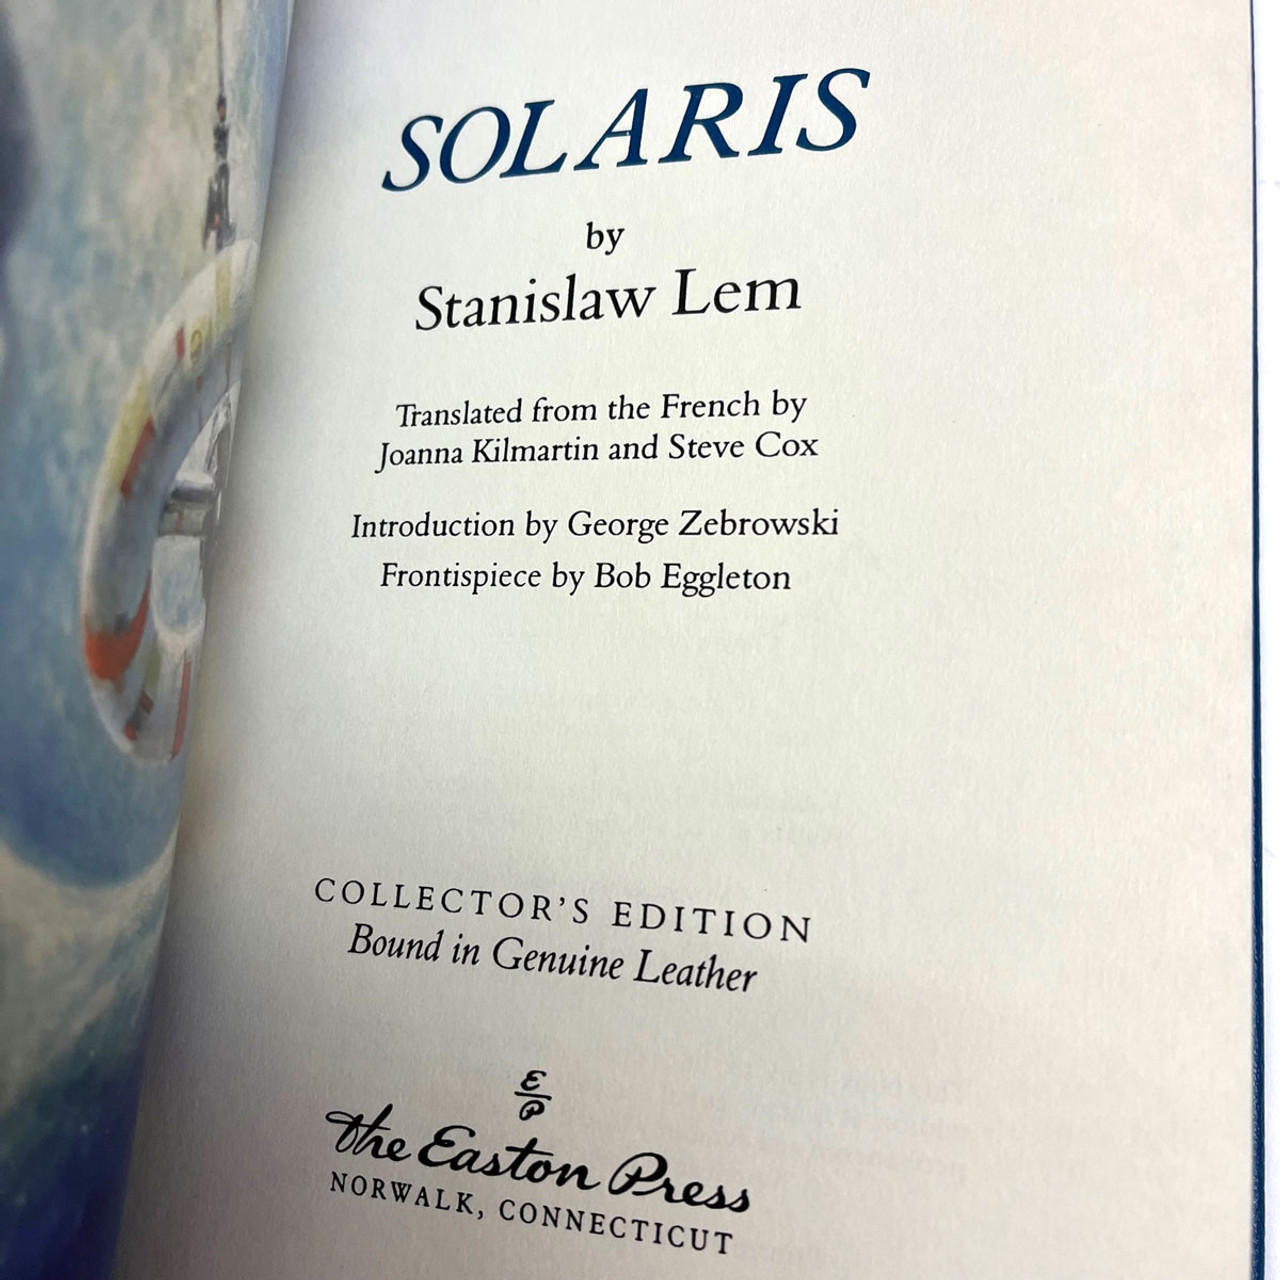 Stanislaw Lem "Solaris" Leather Bound Limited Edition w/Notes [Very Fine]